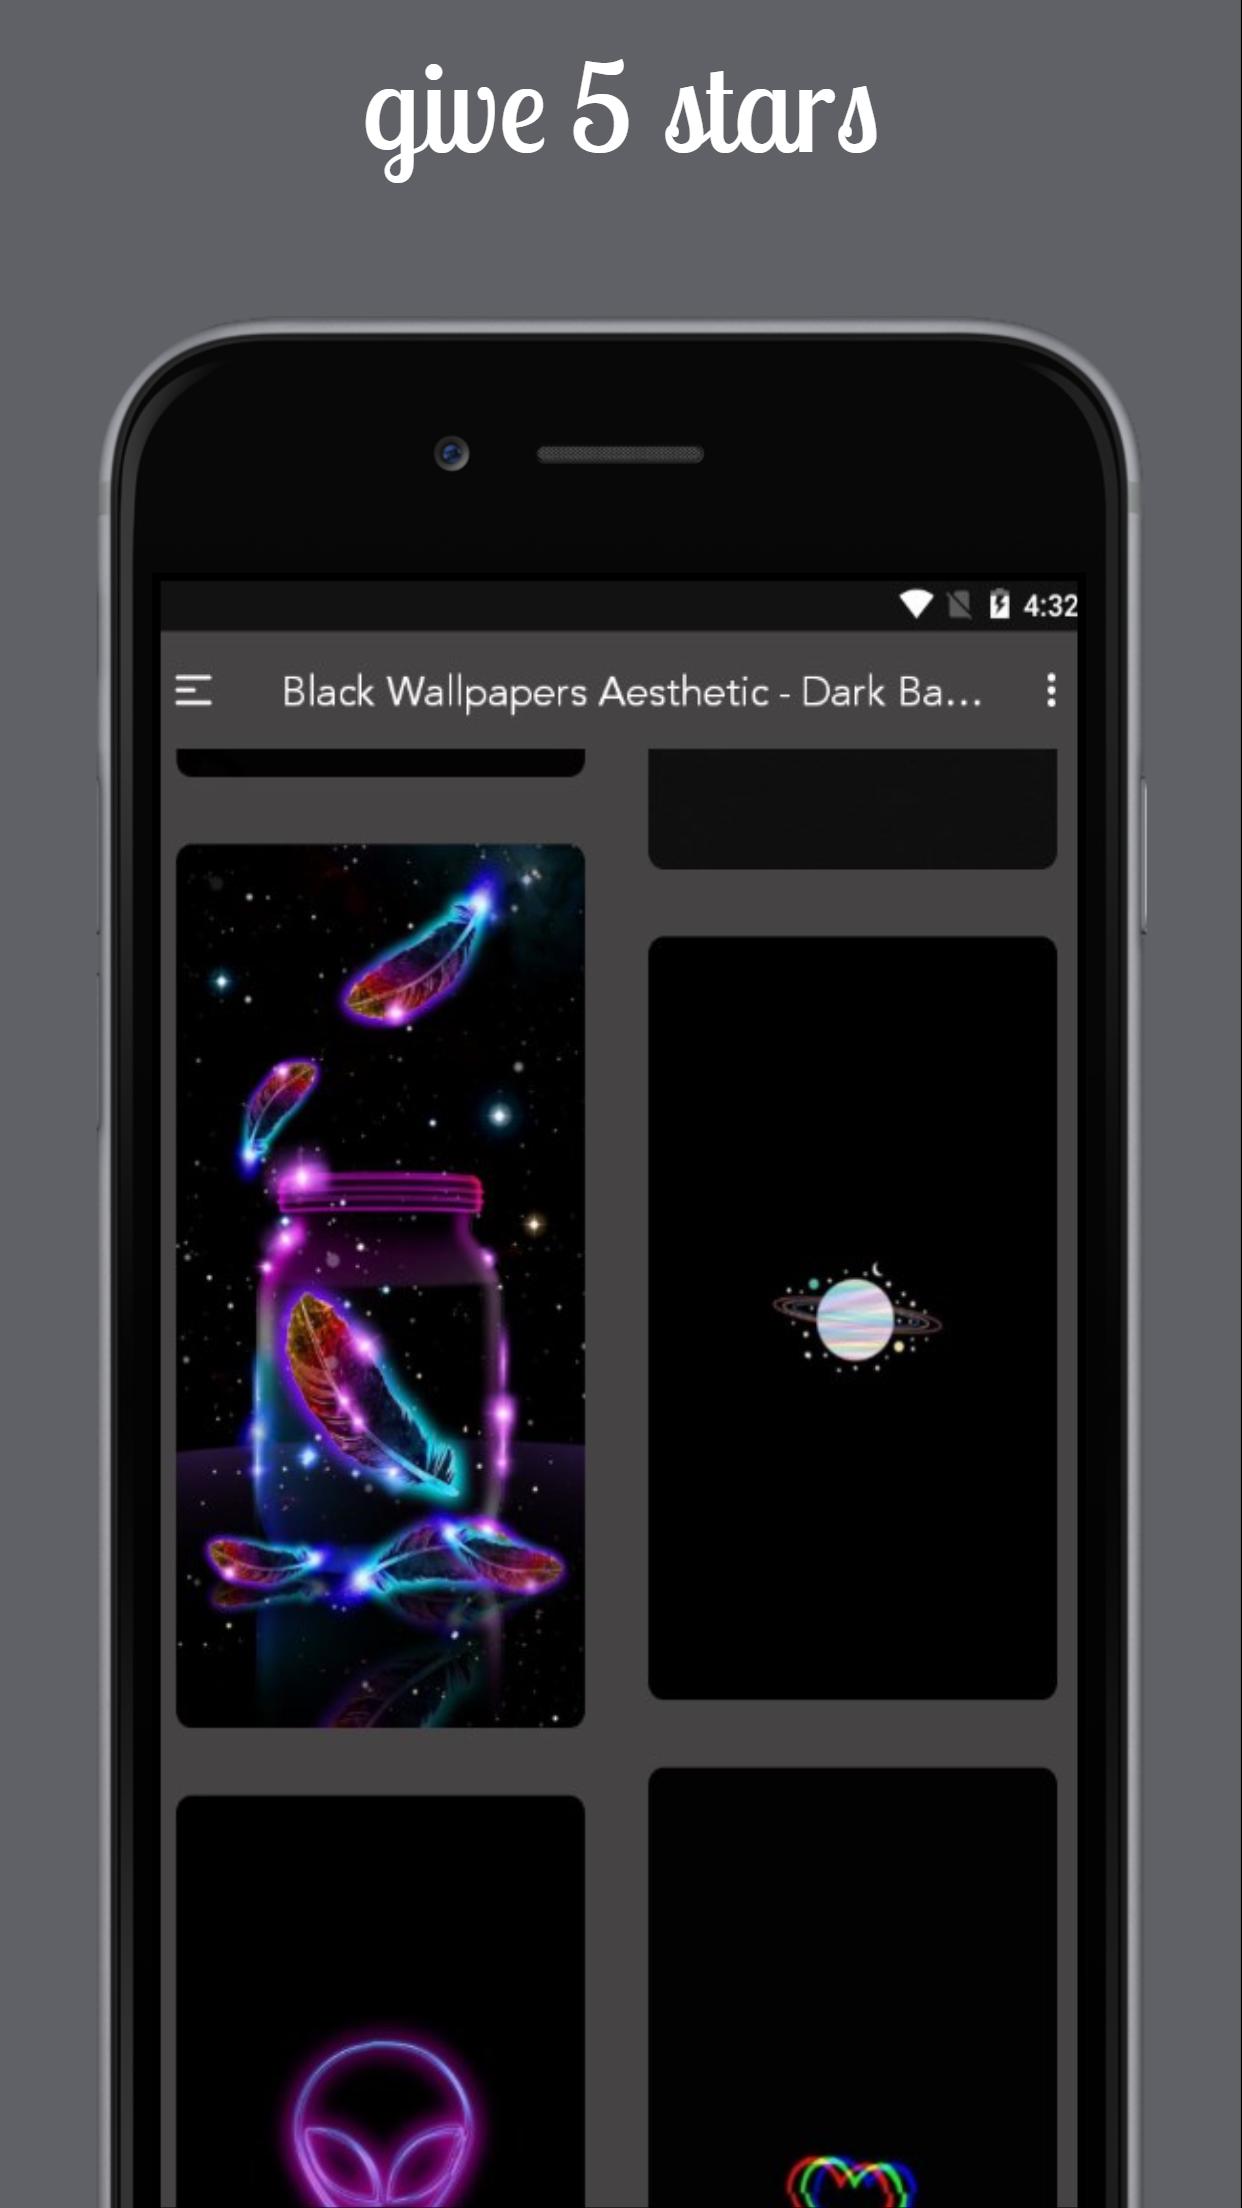 Black Wallpapers Aesthetic Dunkler Hintergrund APK f 252 r Android 